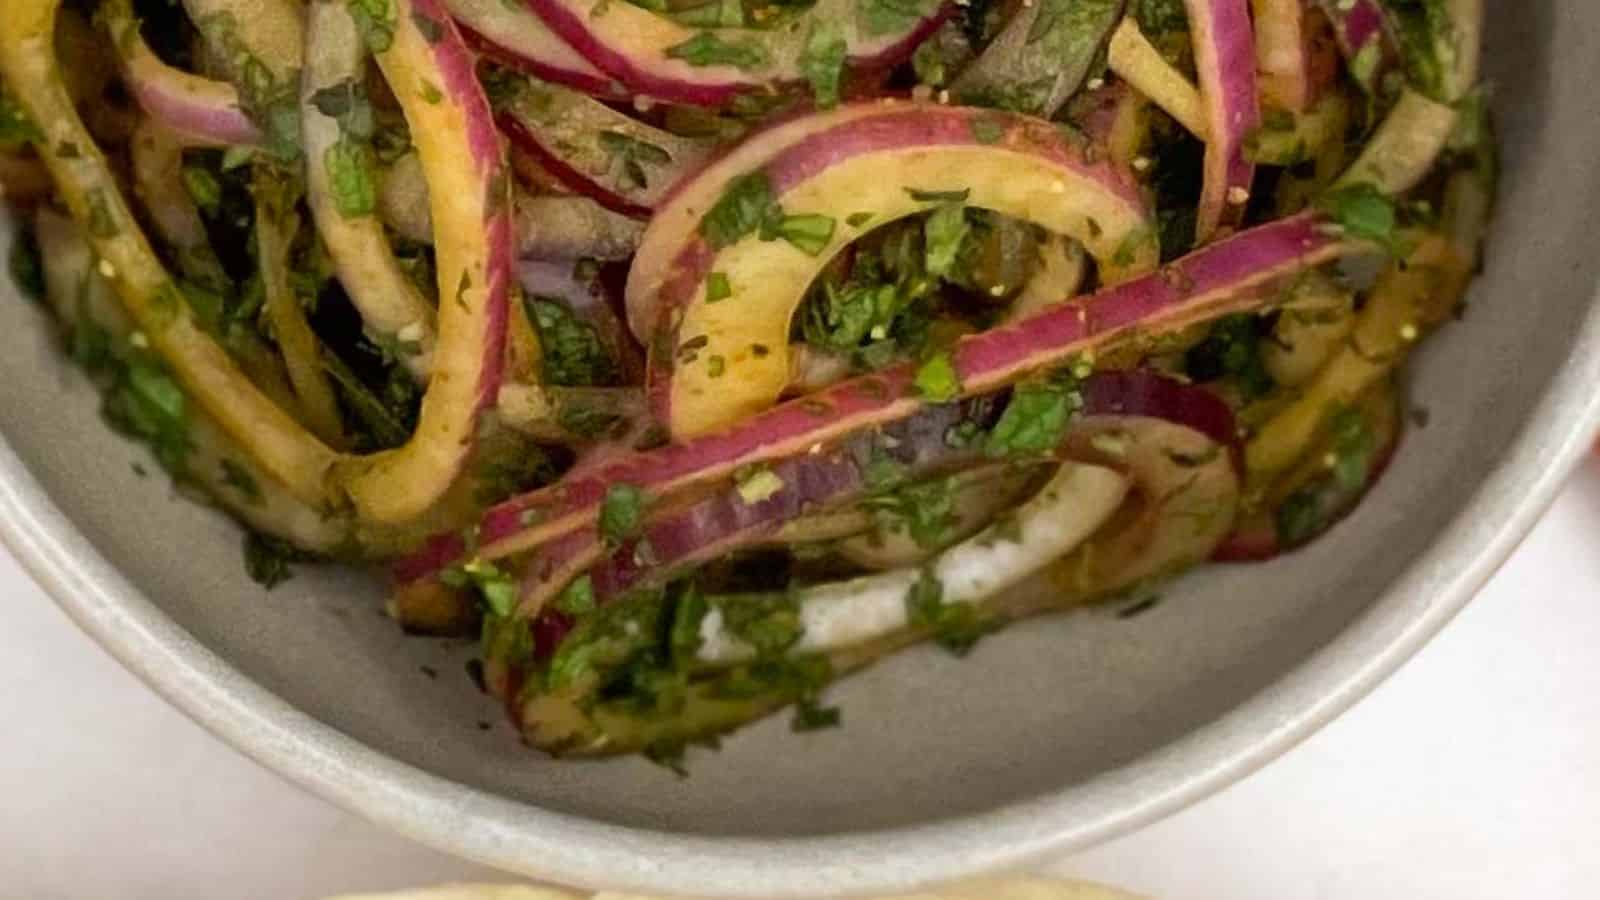 <p>Indian Onion Salad is nothing but simplicity at its finest. Think of crunchy onions and cucumber tossed in a tangy dressing, offering an explosion of flavors with each bite. This salad is versatile enough to fit into any meal, whether a traditional Indian spread or barbecue night.<br><strong>Get the Recipe: </strong><a href="https://www.splashoftaste.com/onion-salad/?utm_source=msn&utm_medium=page&utm_campaign=msn">Indian Onion Salad</a></p>